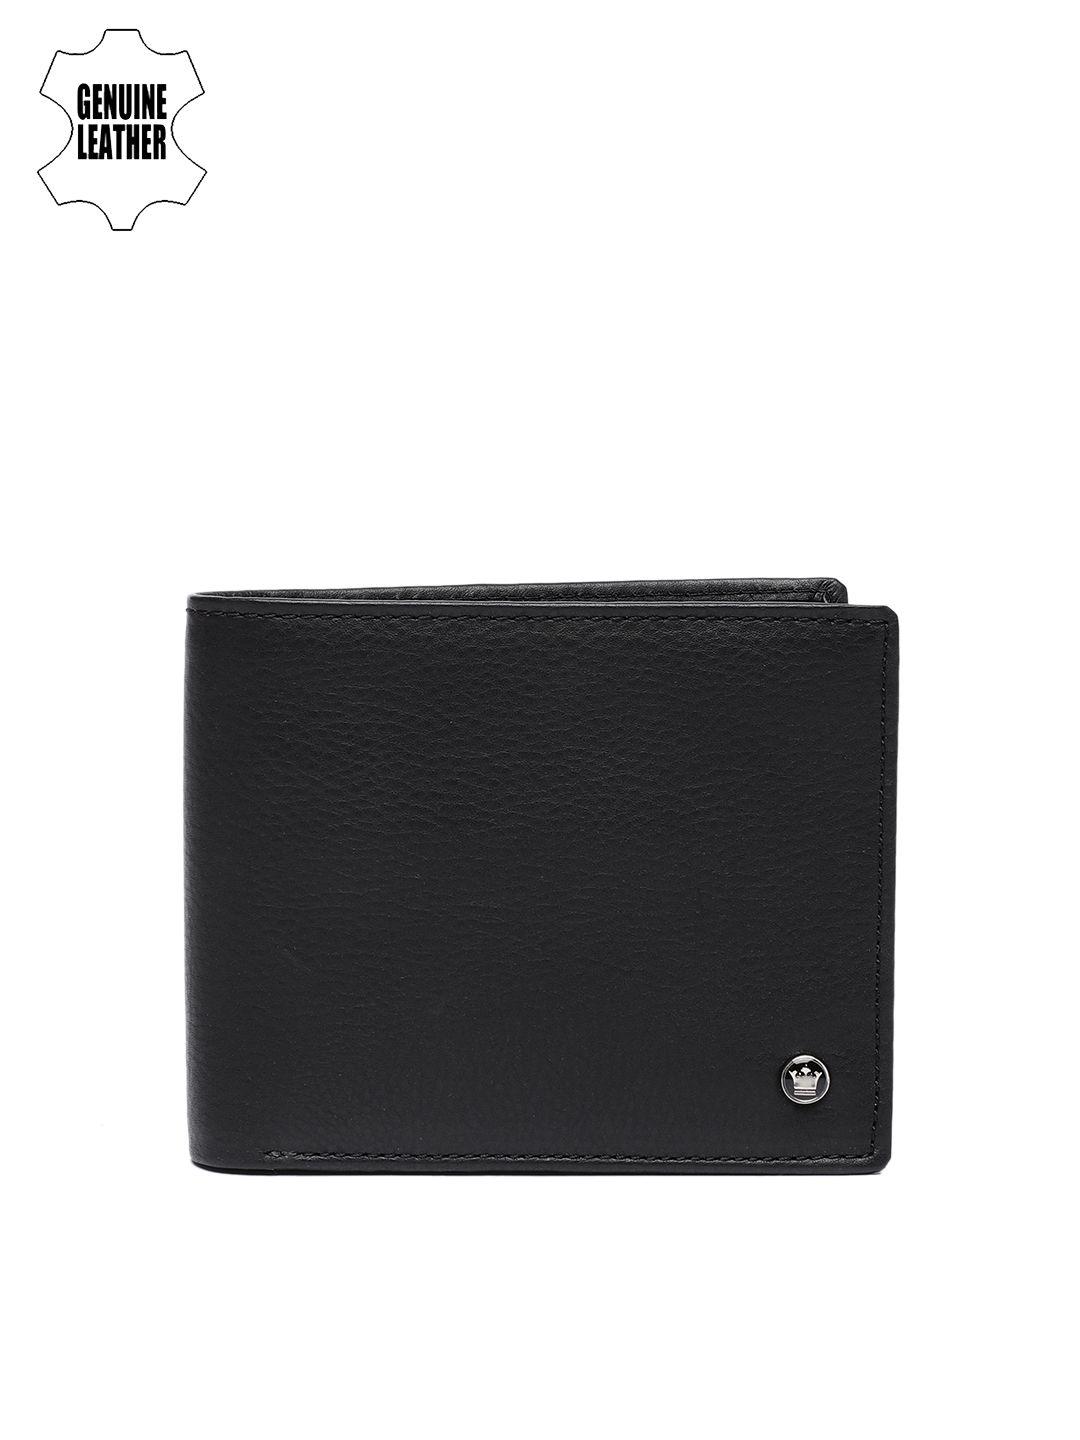 louis philippe men black solid genuine leather two fold wallet